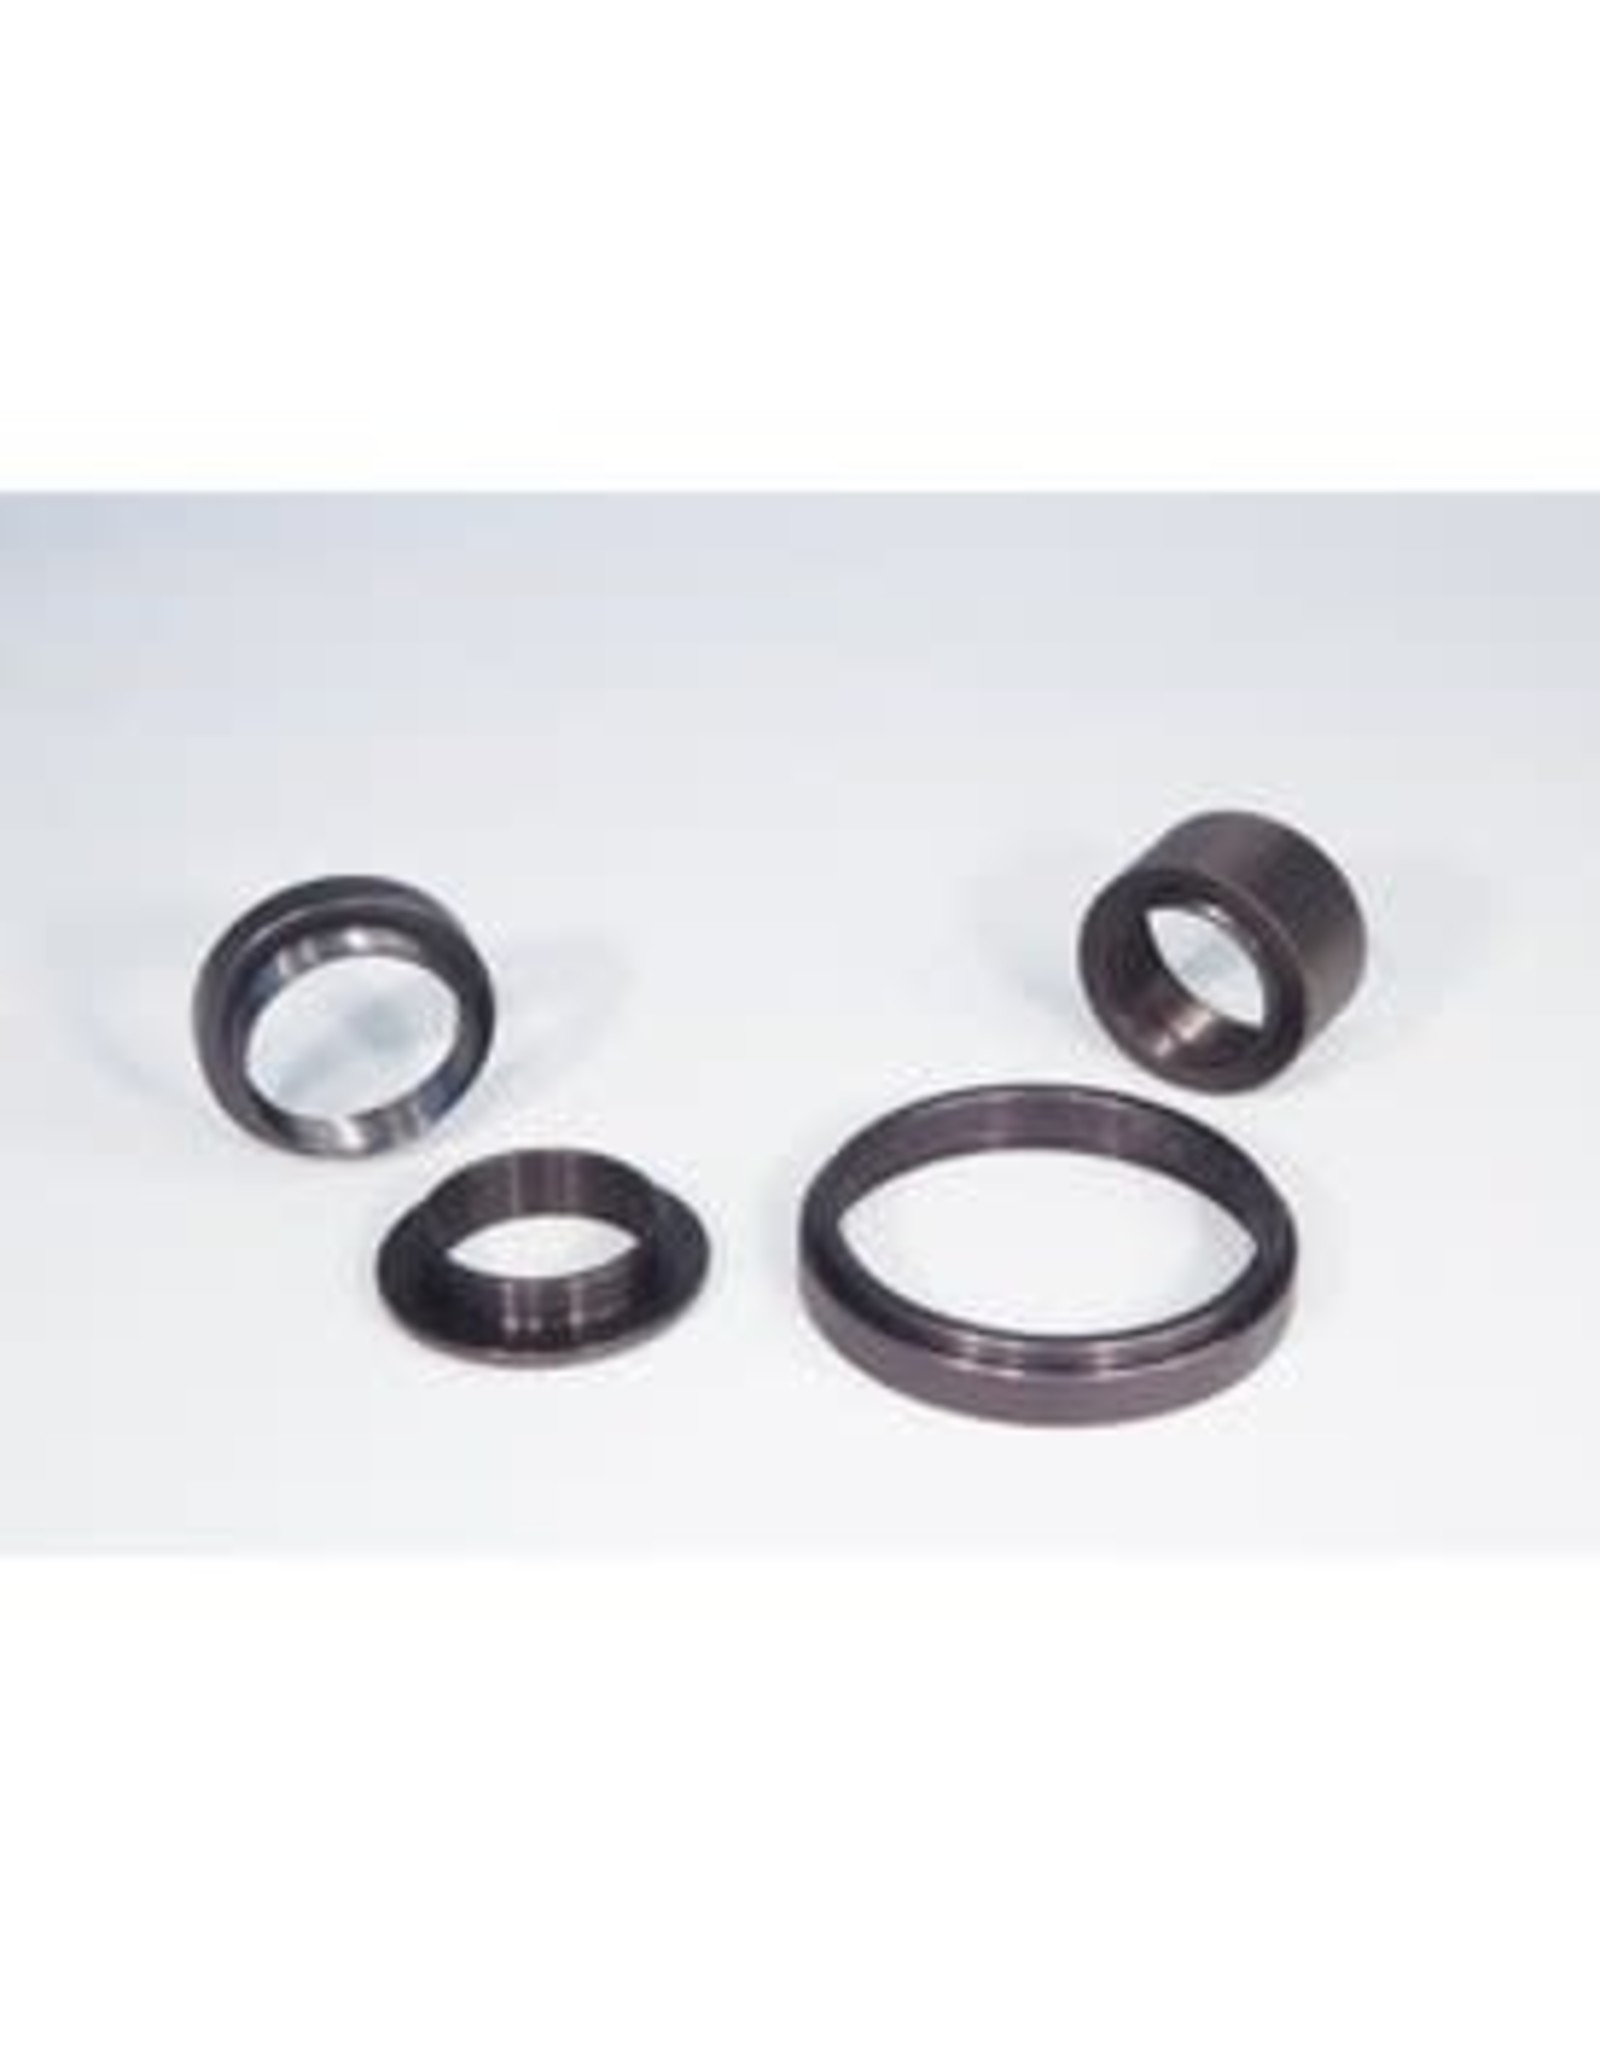 Takahashi Takahashi Sky 90 or New Q Reducer Adapter/Spacer for SBIG ST-Series Camera & CFW10